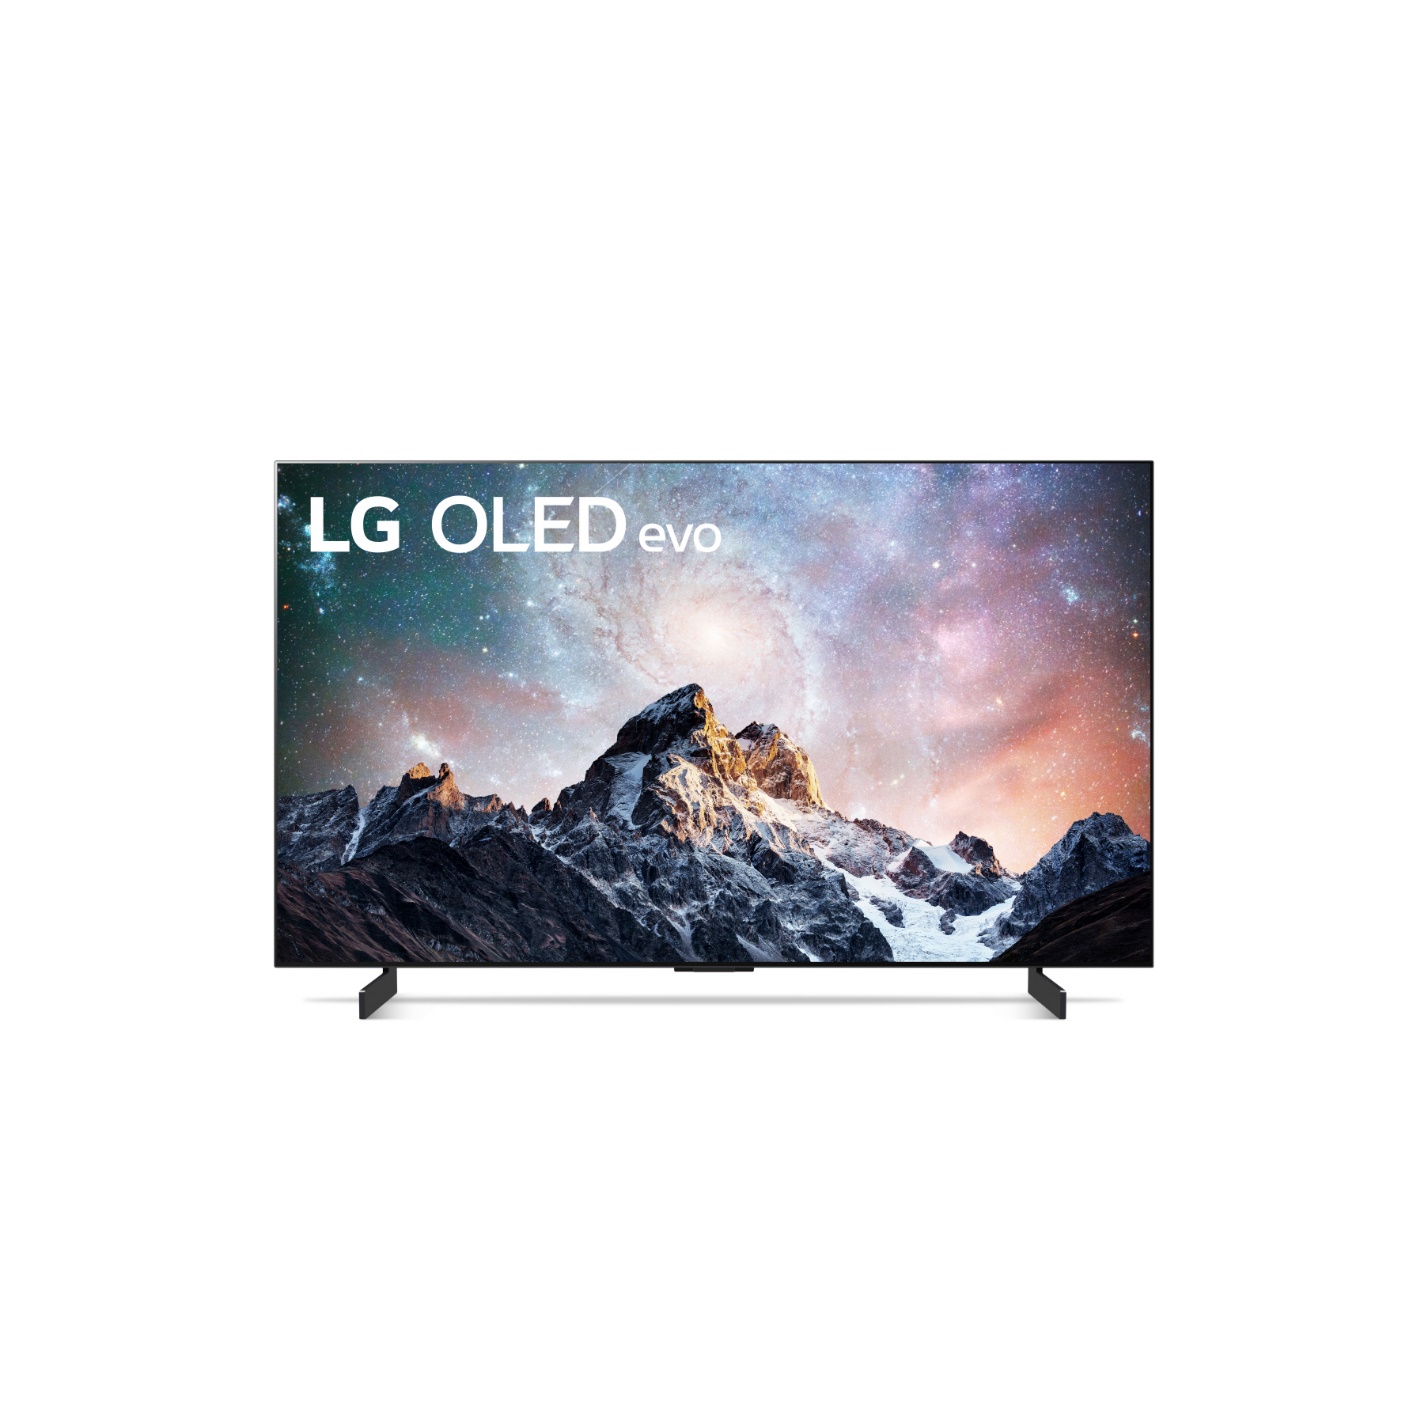 Revealing the super new rookie lineup of the LG OLED TV series - Photo 3.